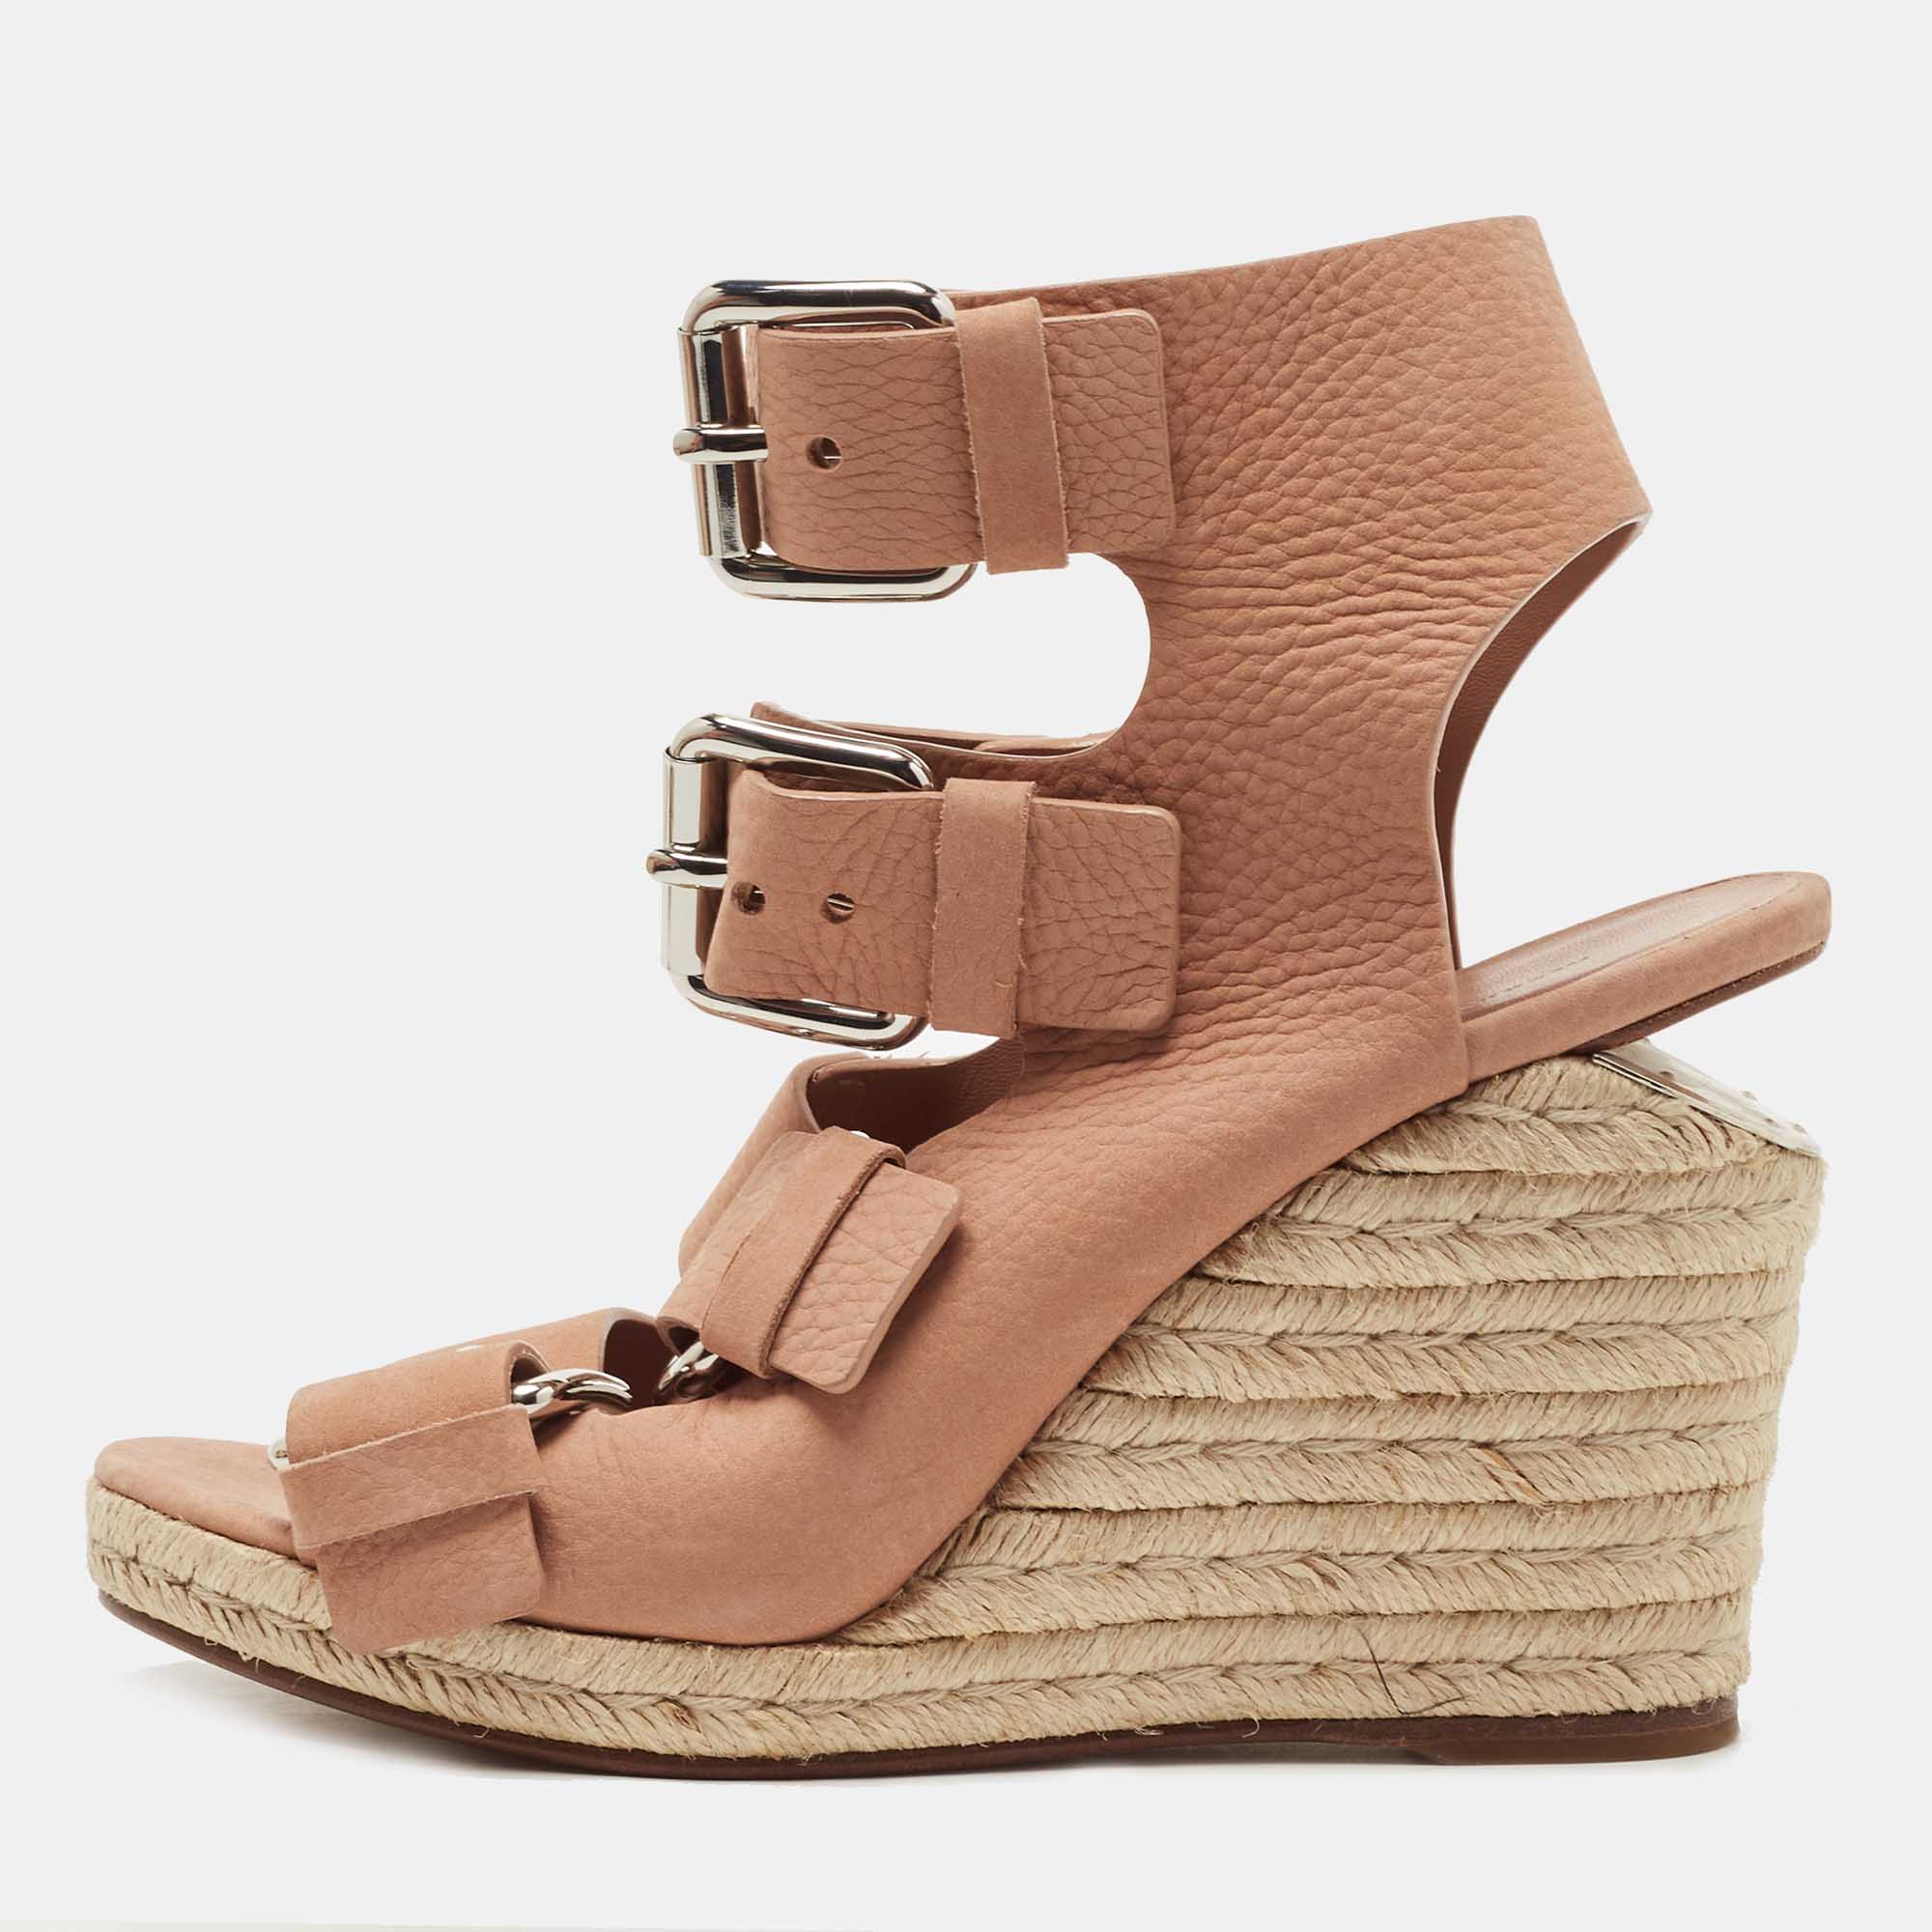 

Alexander Wang Pink Nubuck Leather Buckle Ankle Cuff Espadrille Sandals Size